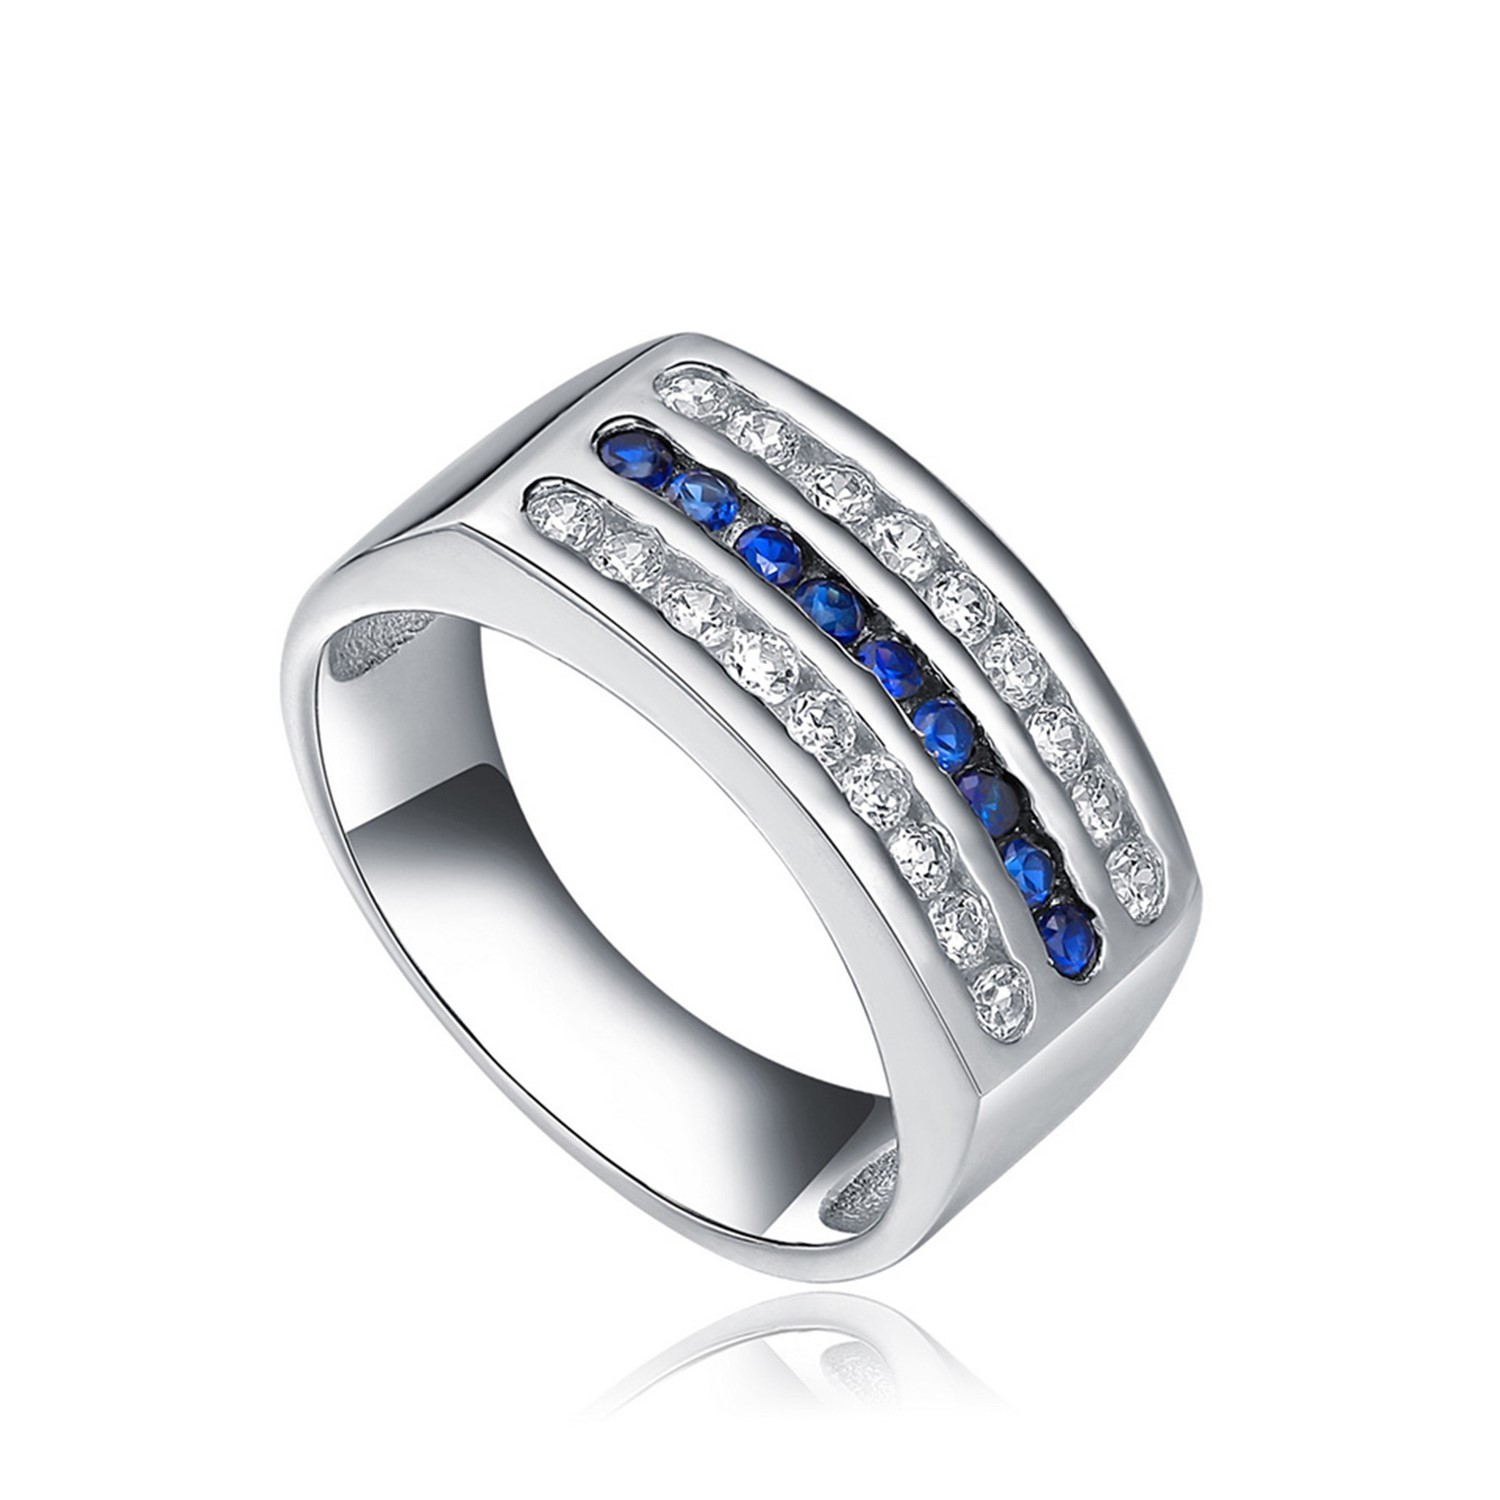 925 Sterling Silver Ring Three Line Row Round Blue Sapphire Fine Jewelry ring Men Women Wedding ring